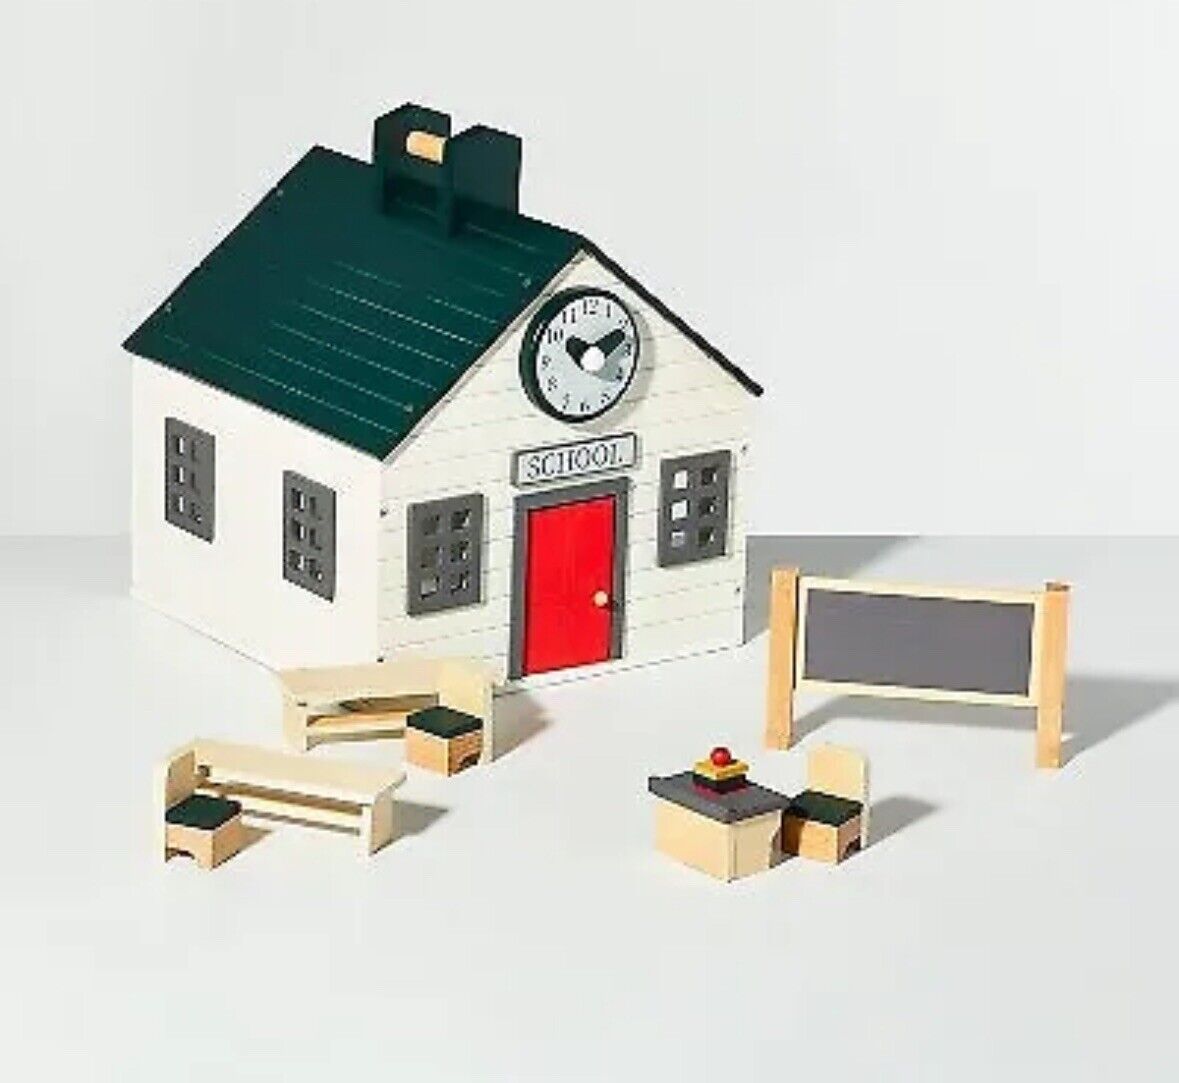 Toy Schoolhouse - Hearth & Hand with Magnolia